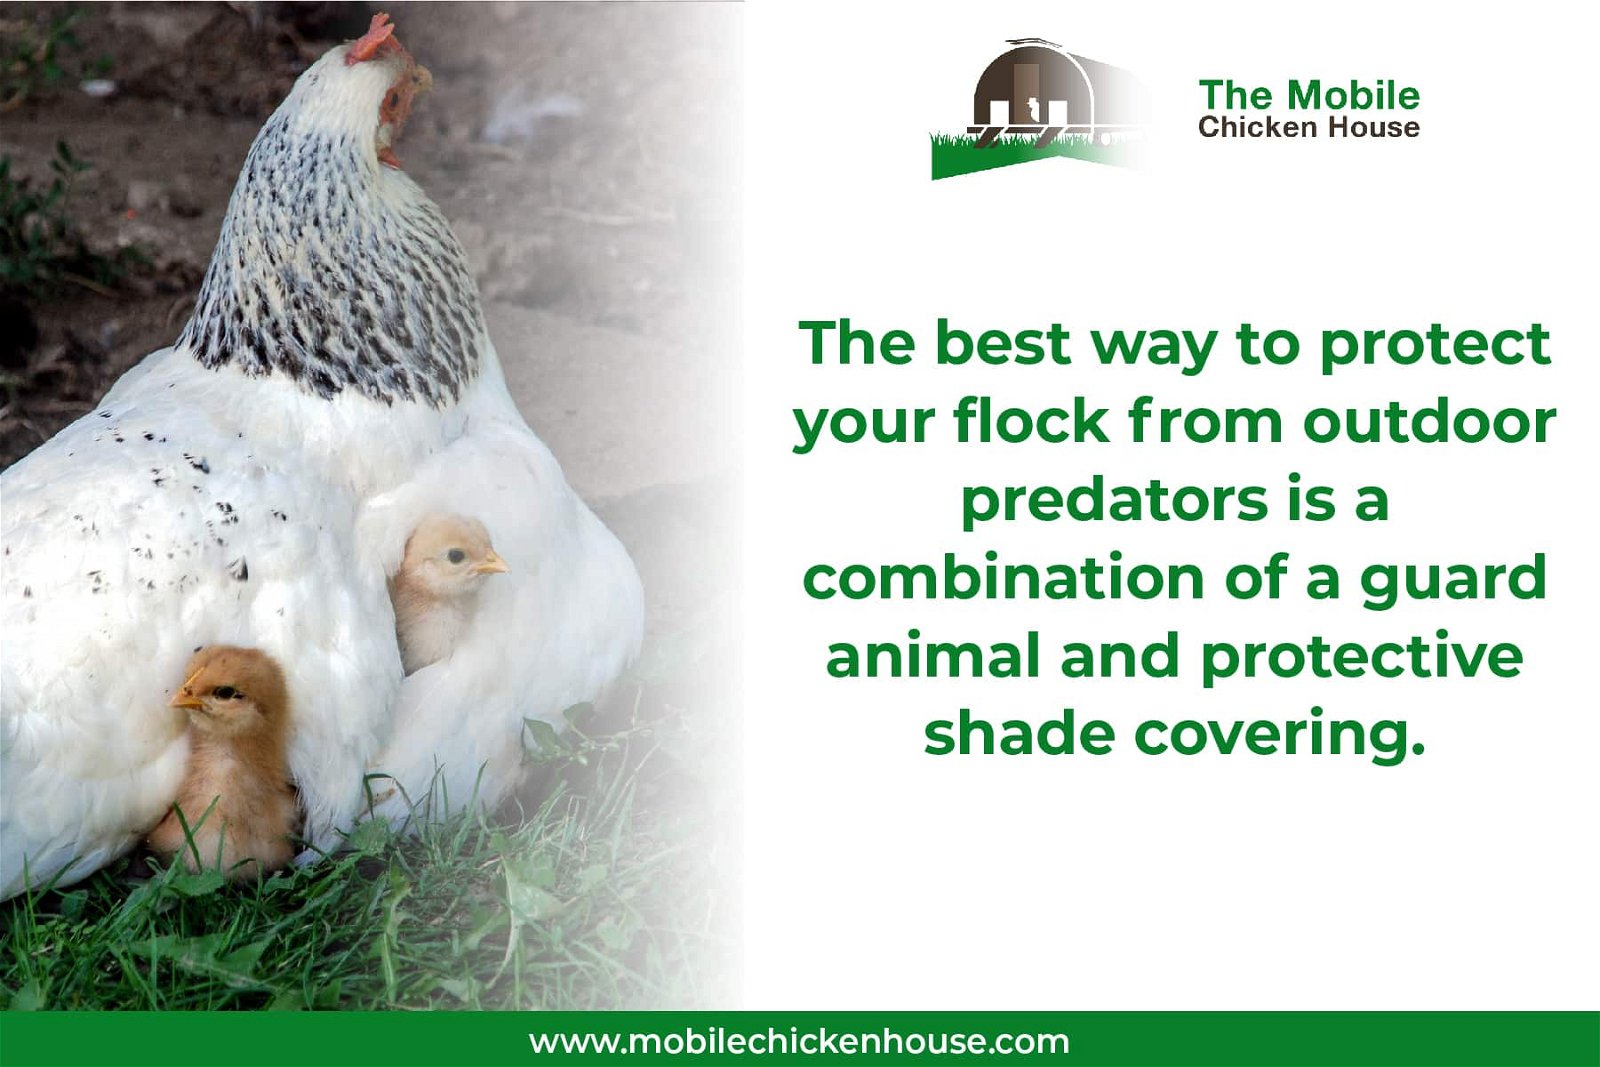 protect your chickens with a shade covering and guard animal